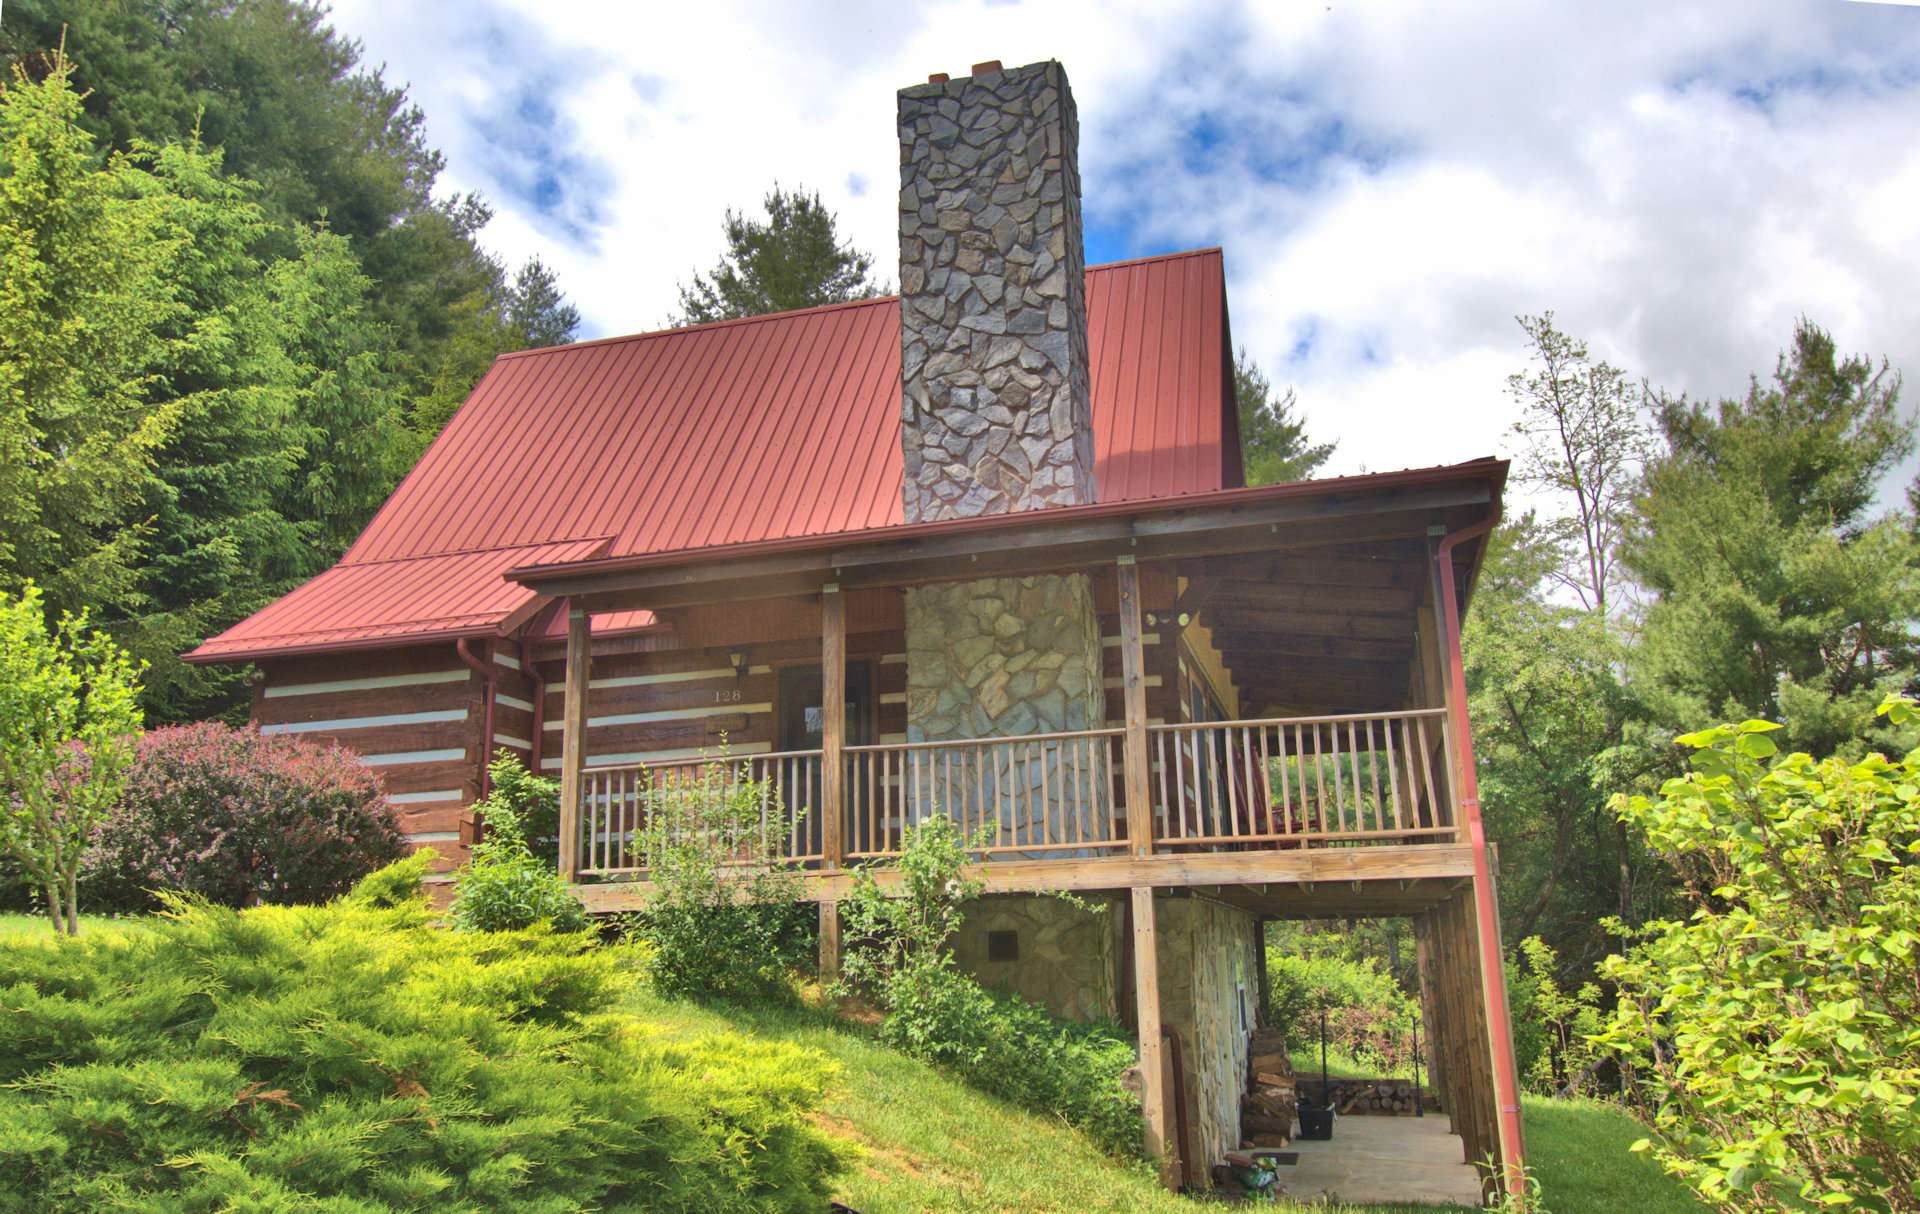 Your private log cabin retreat in the Virginia Mountains awaits!  The location is convenient to area trout streams, the New River, Grayson Highlands State Park, Mount Rogers Recreation Area, and just a short drive to Hungry Mother State Park and West Jefferson, NC.